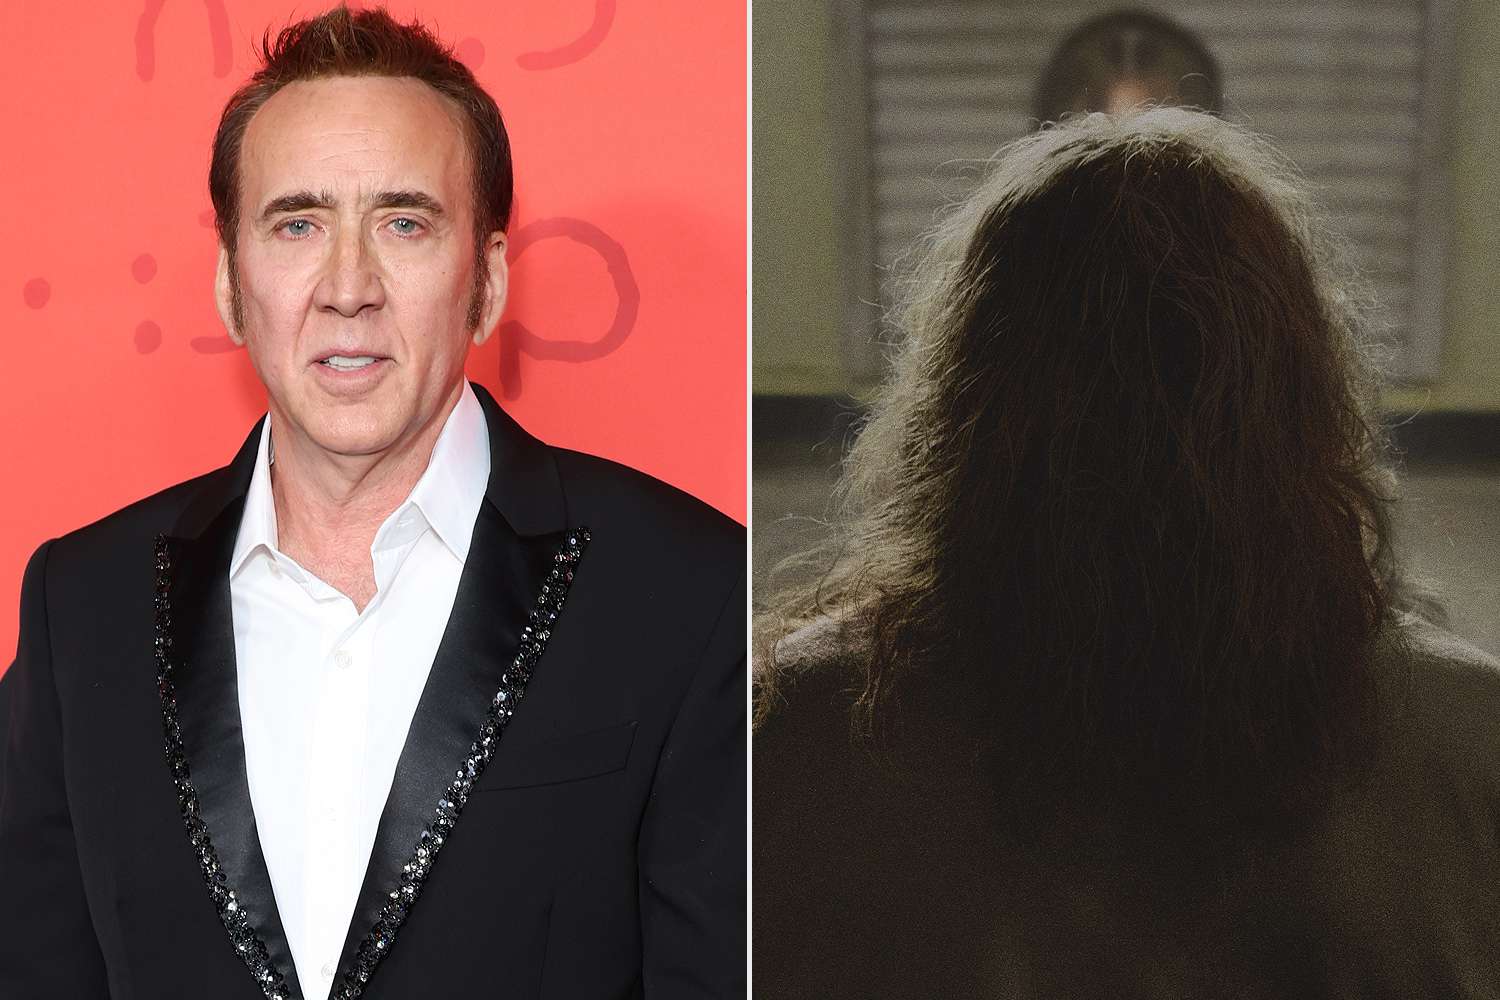 “Longlegs ”Director Breaks Down Nicolas Cage's Terrifying Transformation: He Performed a 'Disappearing Act' (Exclusive)